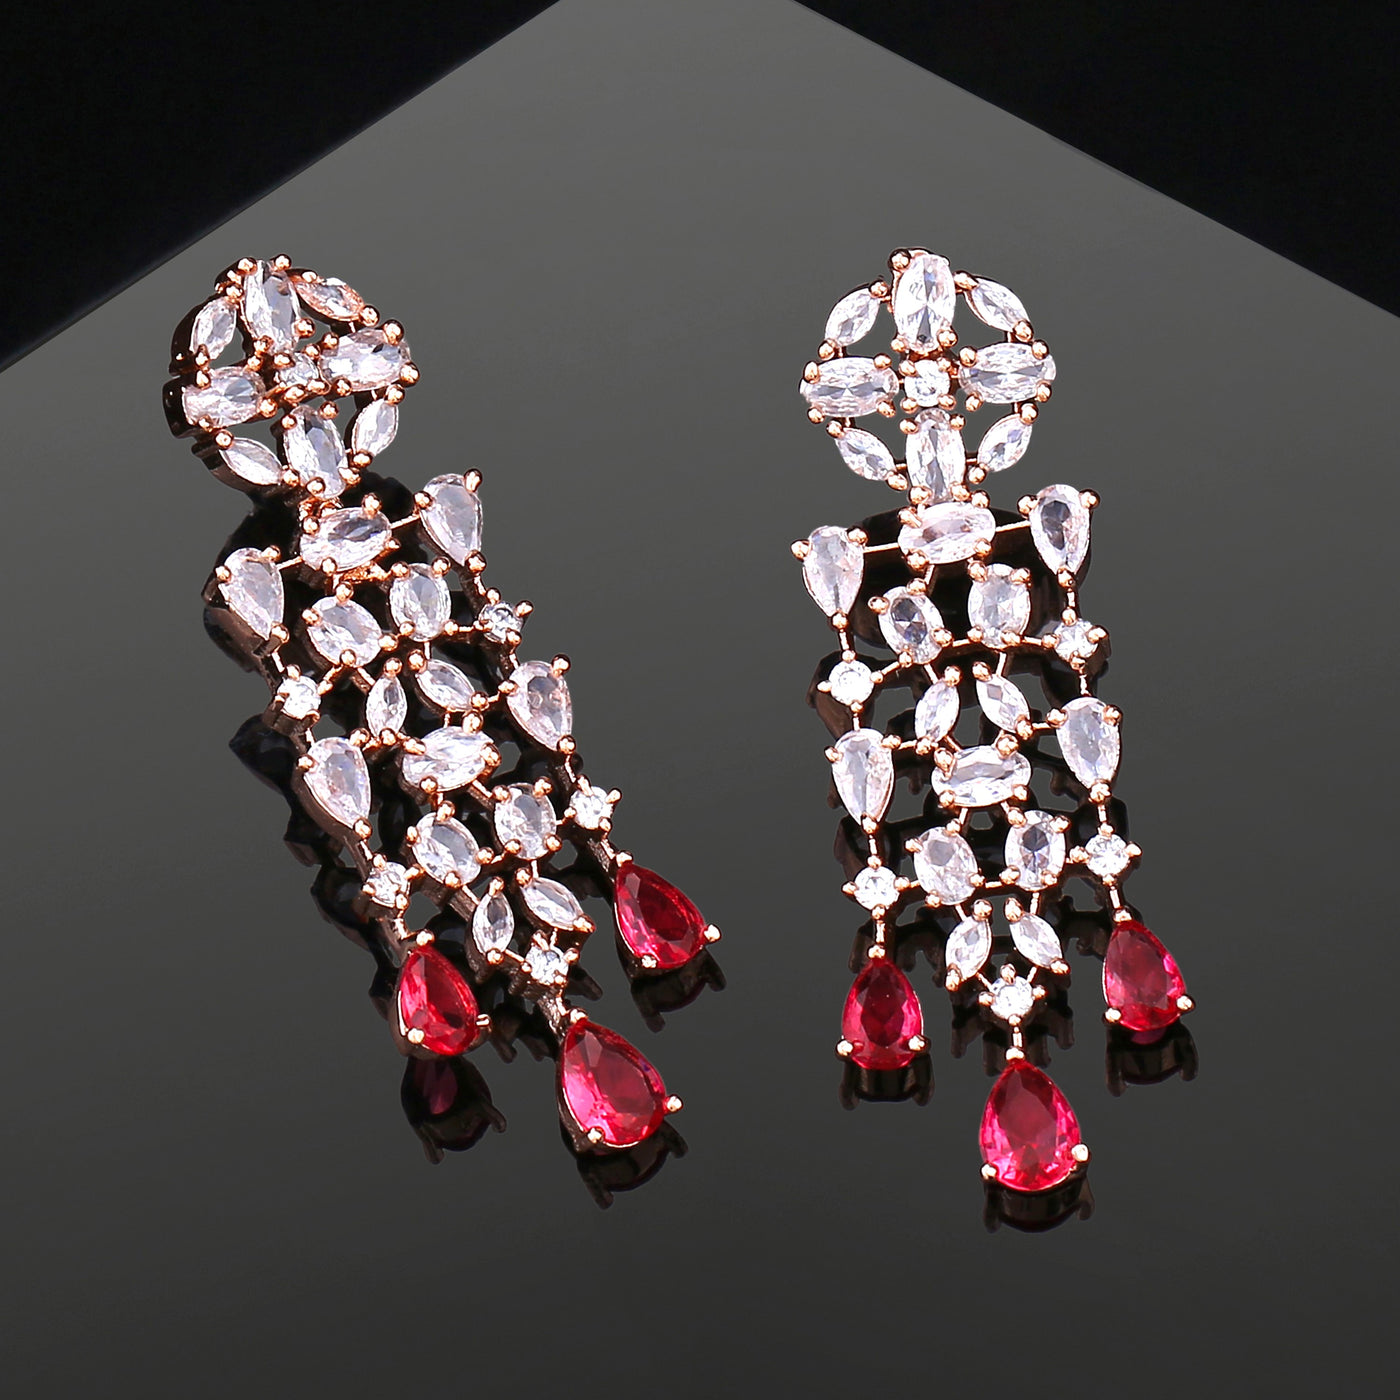 Estele Rose Gold Plated CZ Shimmery Trickle Designer Earrings with Tourmaline Pink Stones for Women